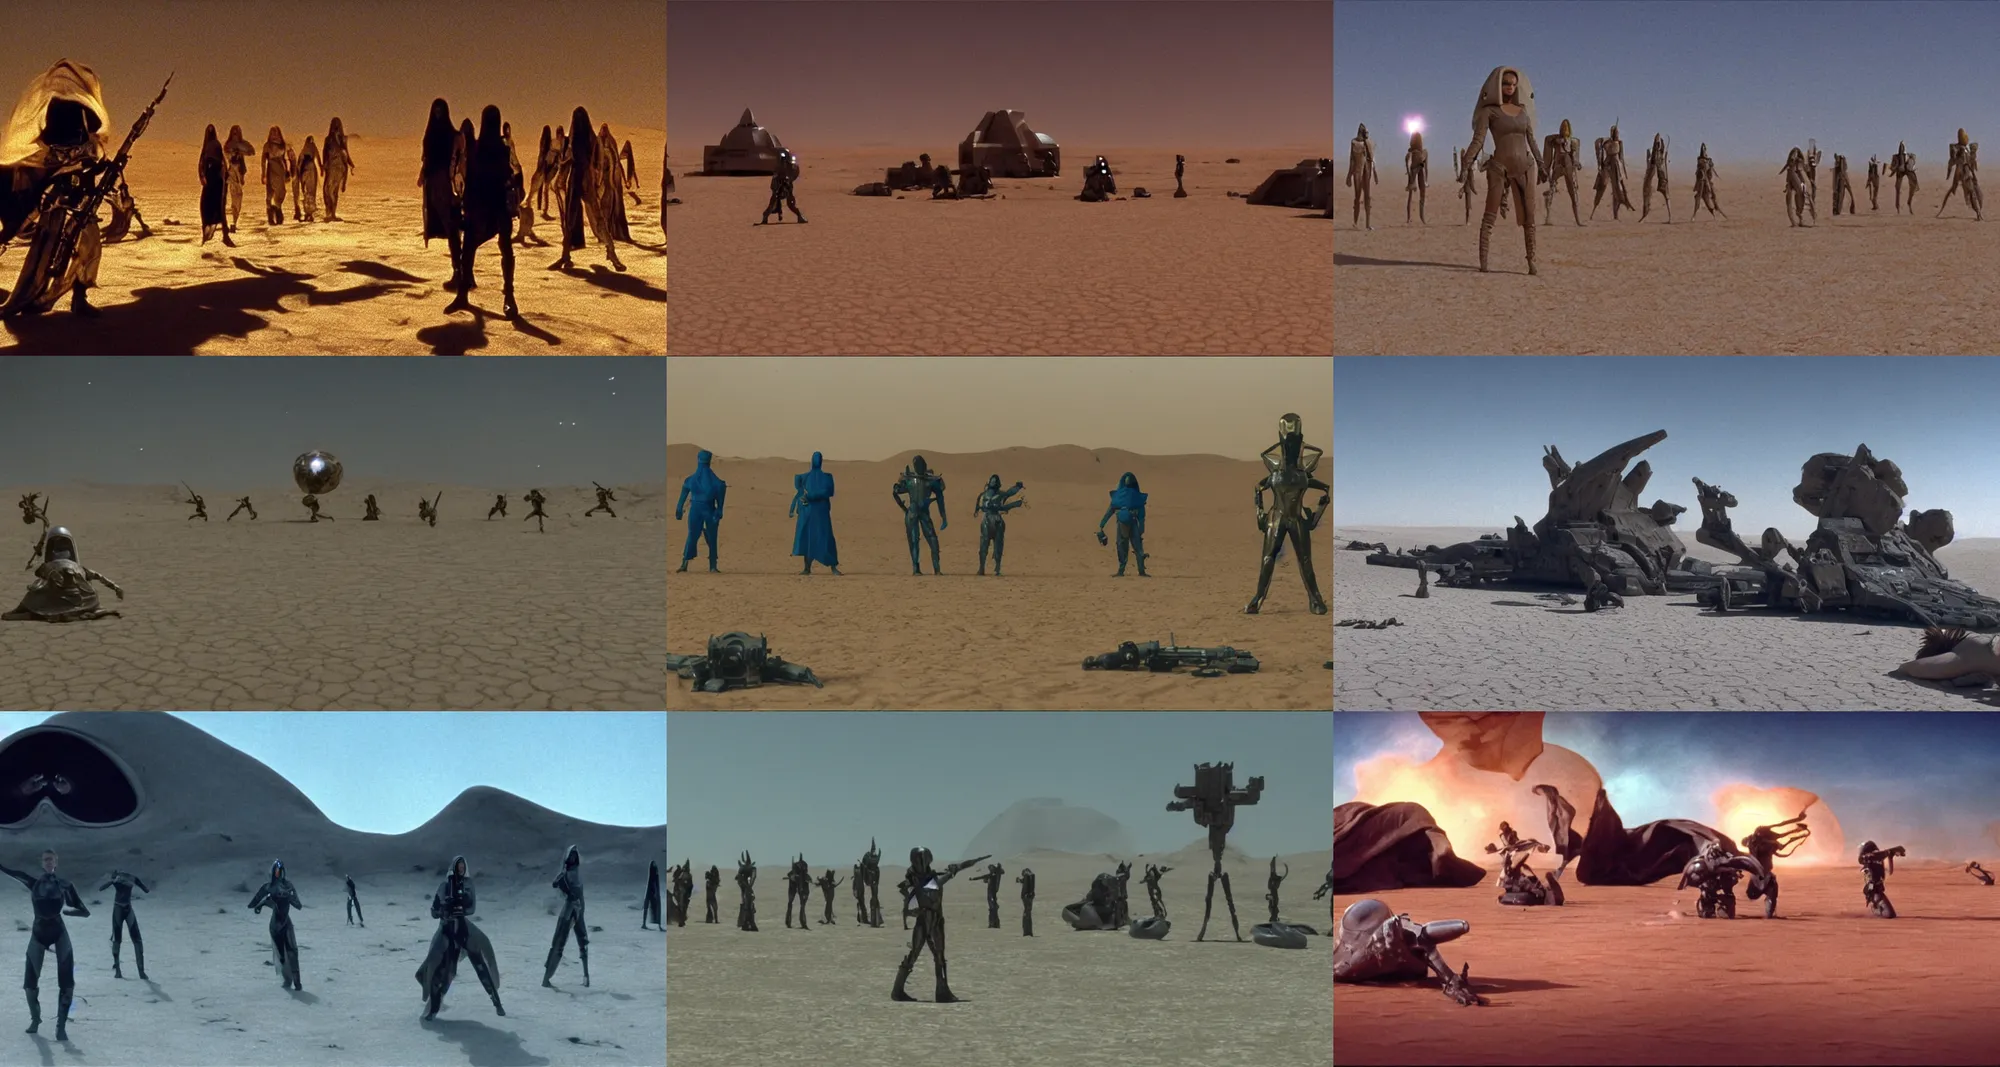 Prompt: the mass battle scene between bene gesserit women and harkonnens in the desert near the abandoned buildings in night arrakis desert, spaceship exploding, laser guns, film still from the movie by alejandro jodorowsky with cinematogrophy of christopher doyle and art direction by hans giger, anamorphic lens, kodakchrome, 8 k,